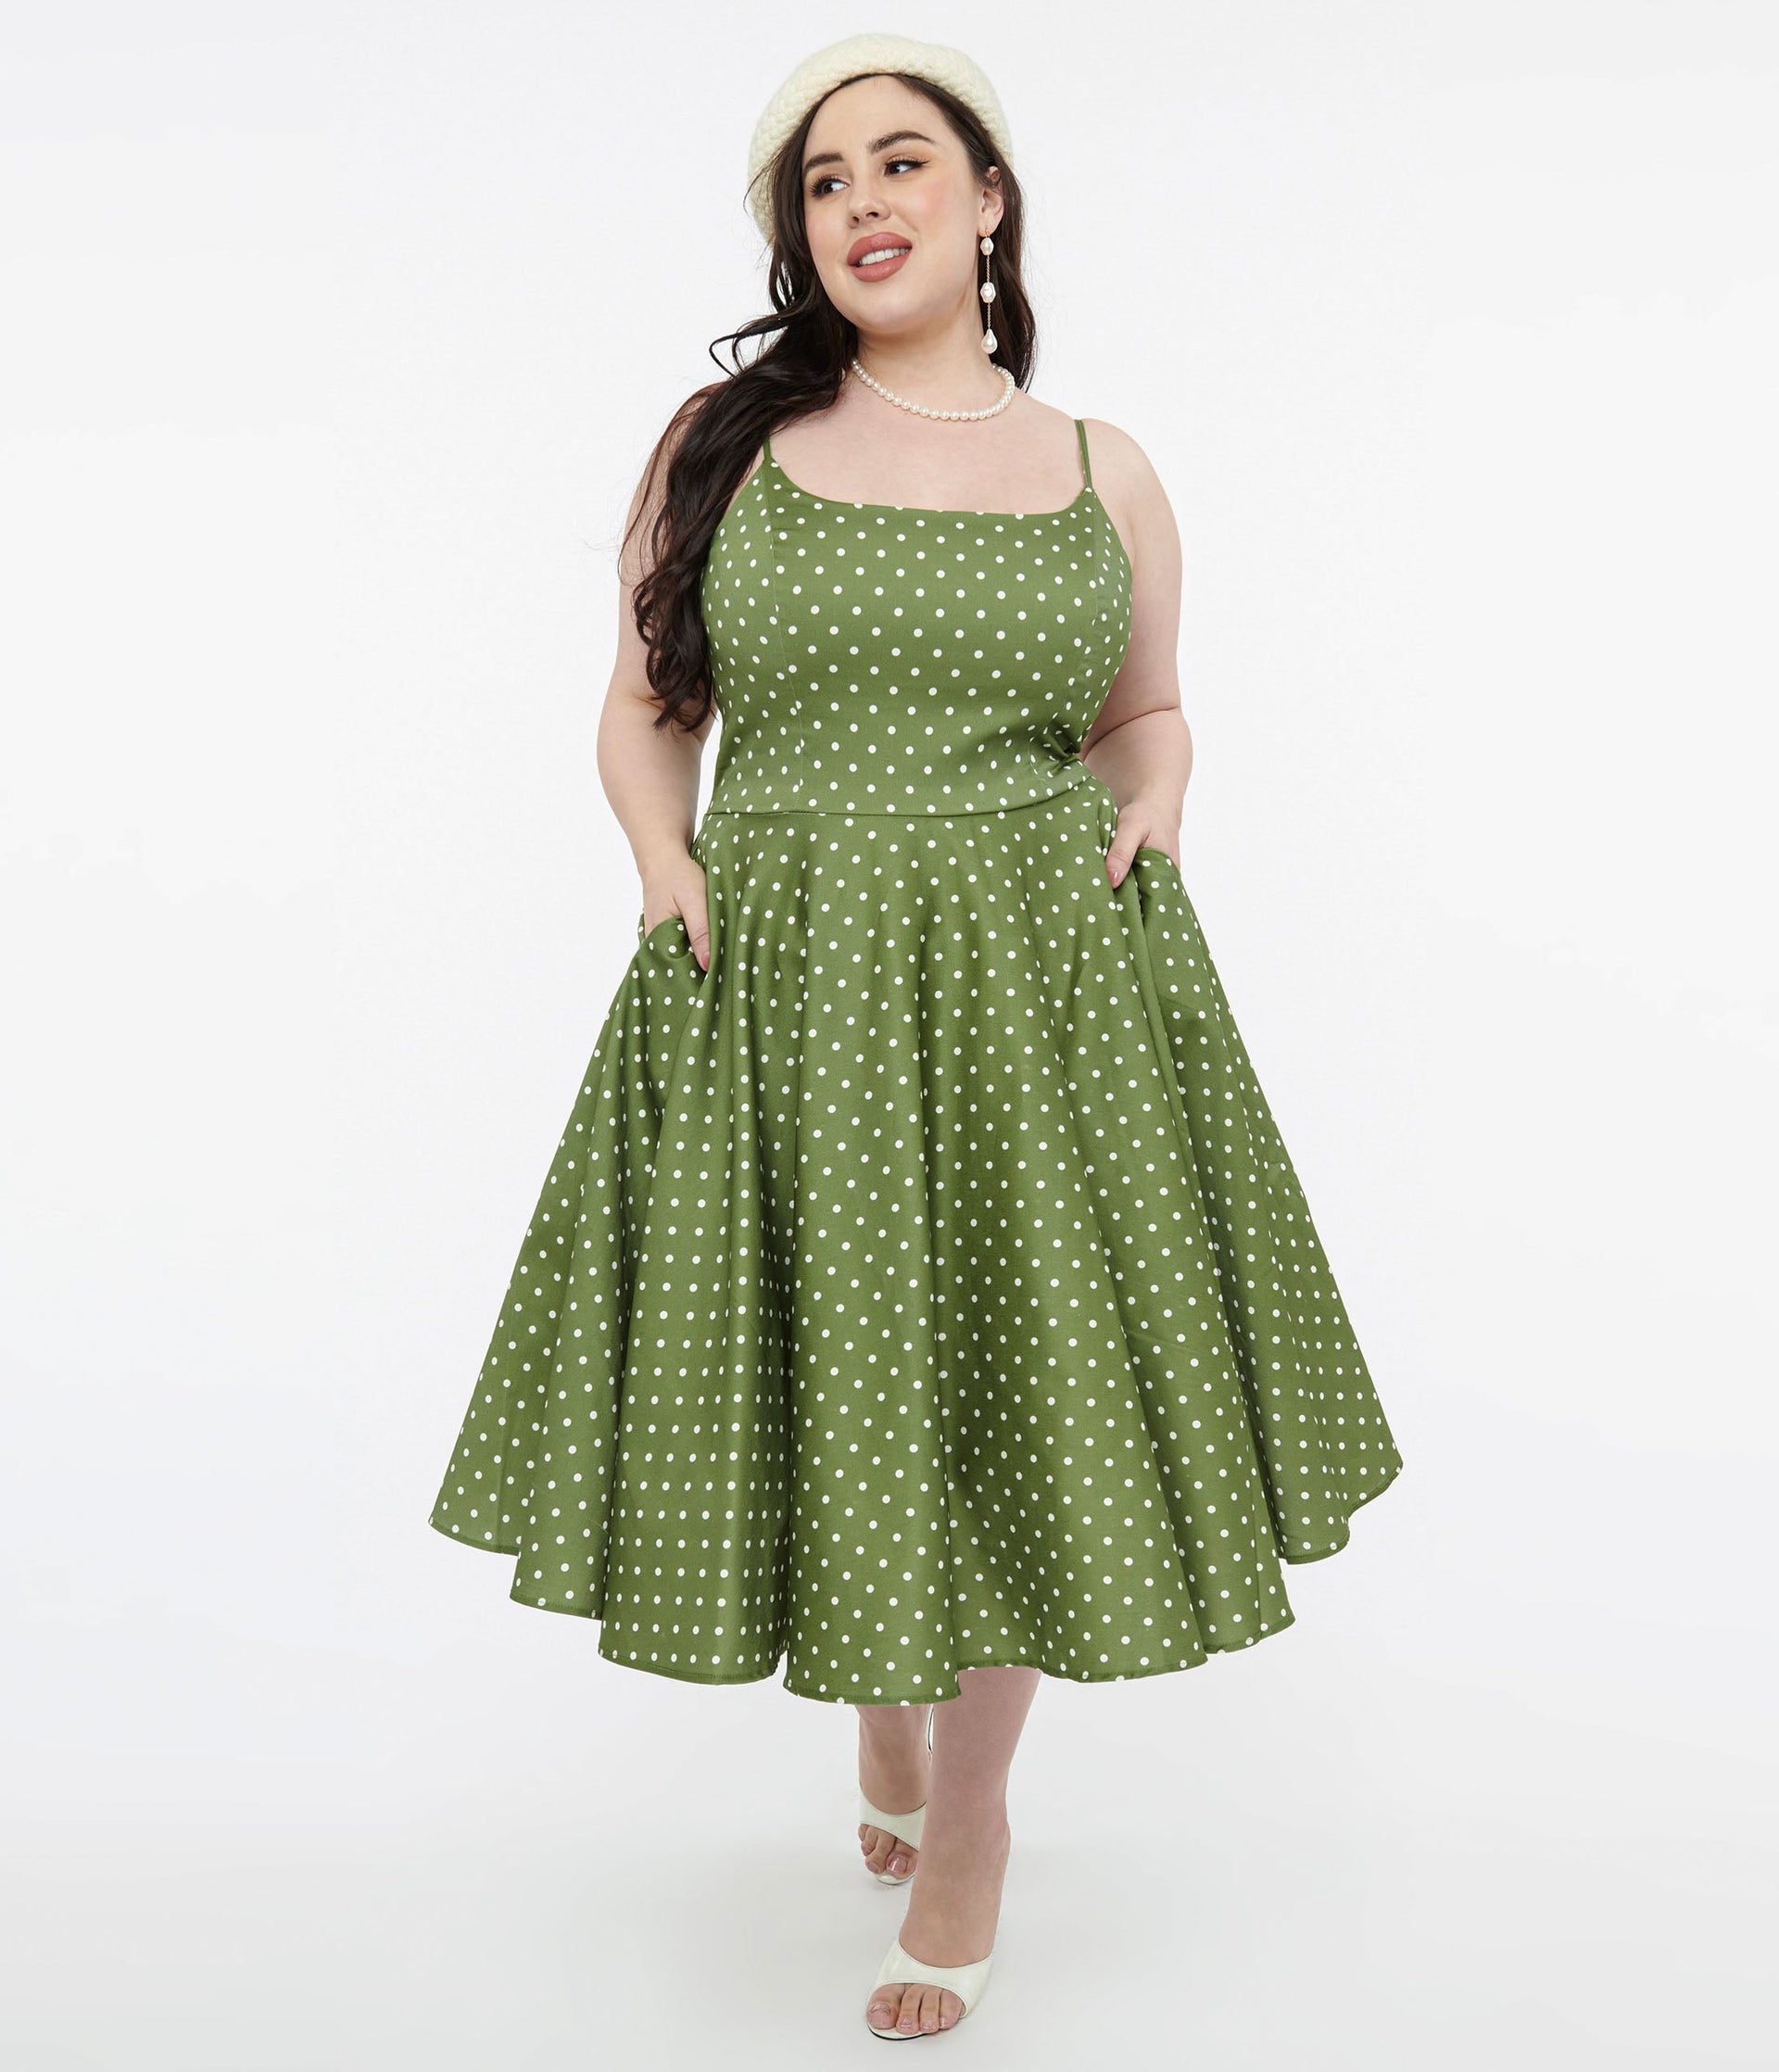 1950s Olive Green & White Polka Dot Peggy Cotton Swing Dress - Unique Vintage - Womens, DRESSES, SWING